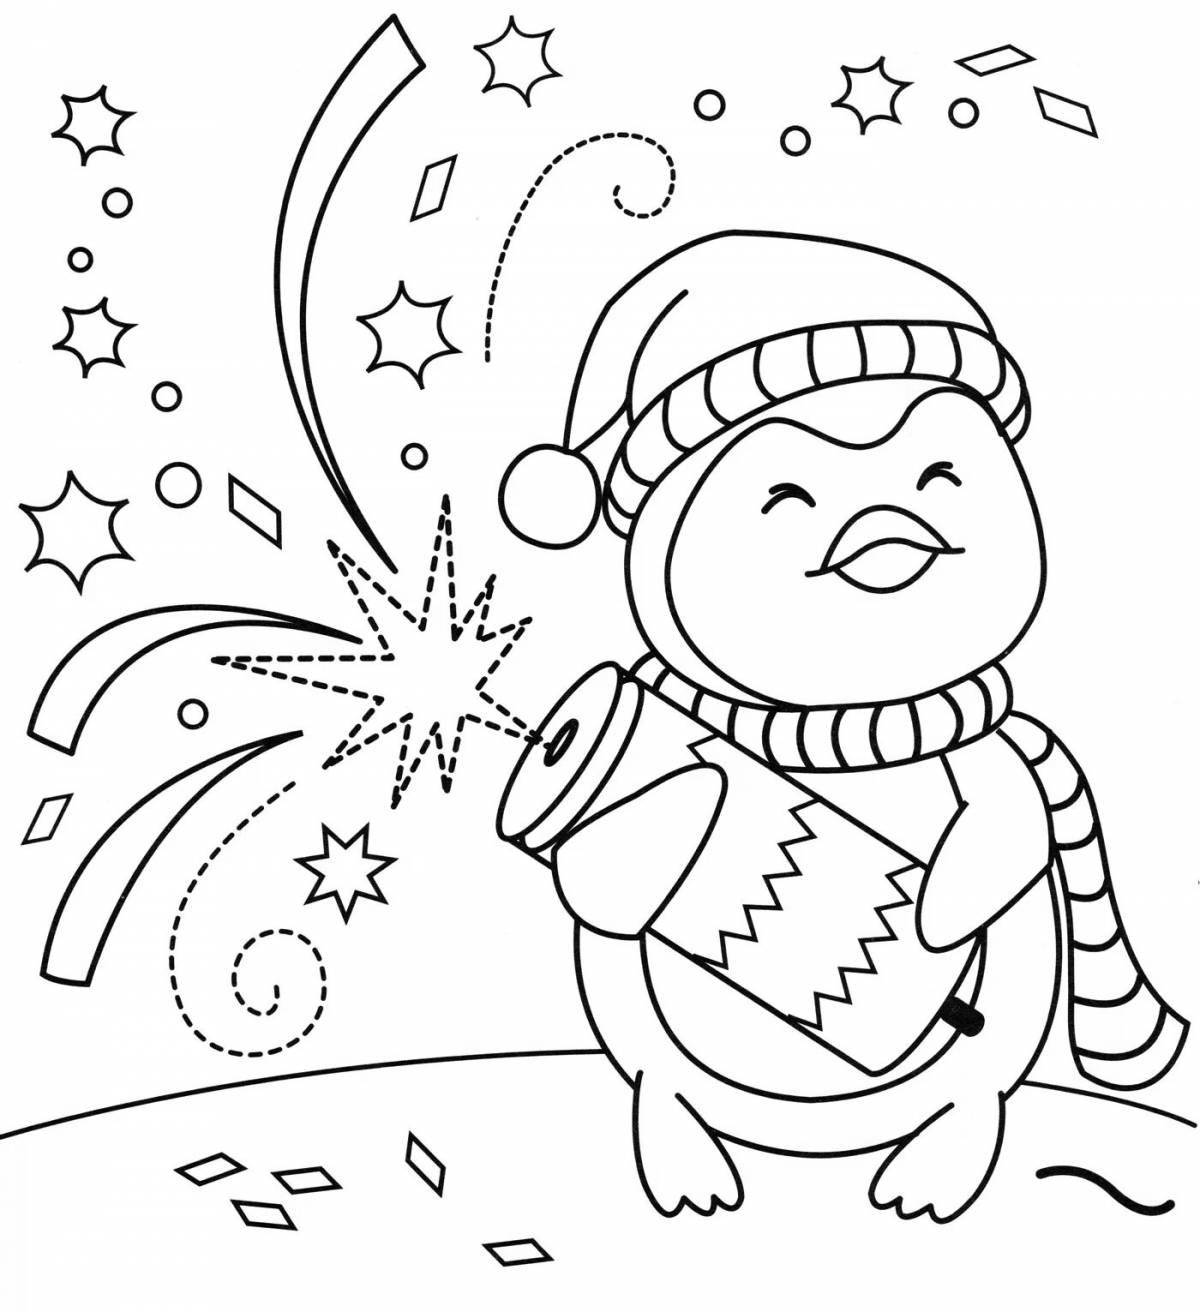 Happy new year 2023 coloring book